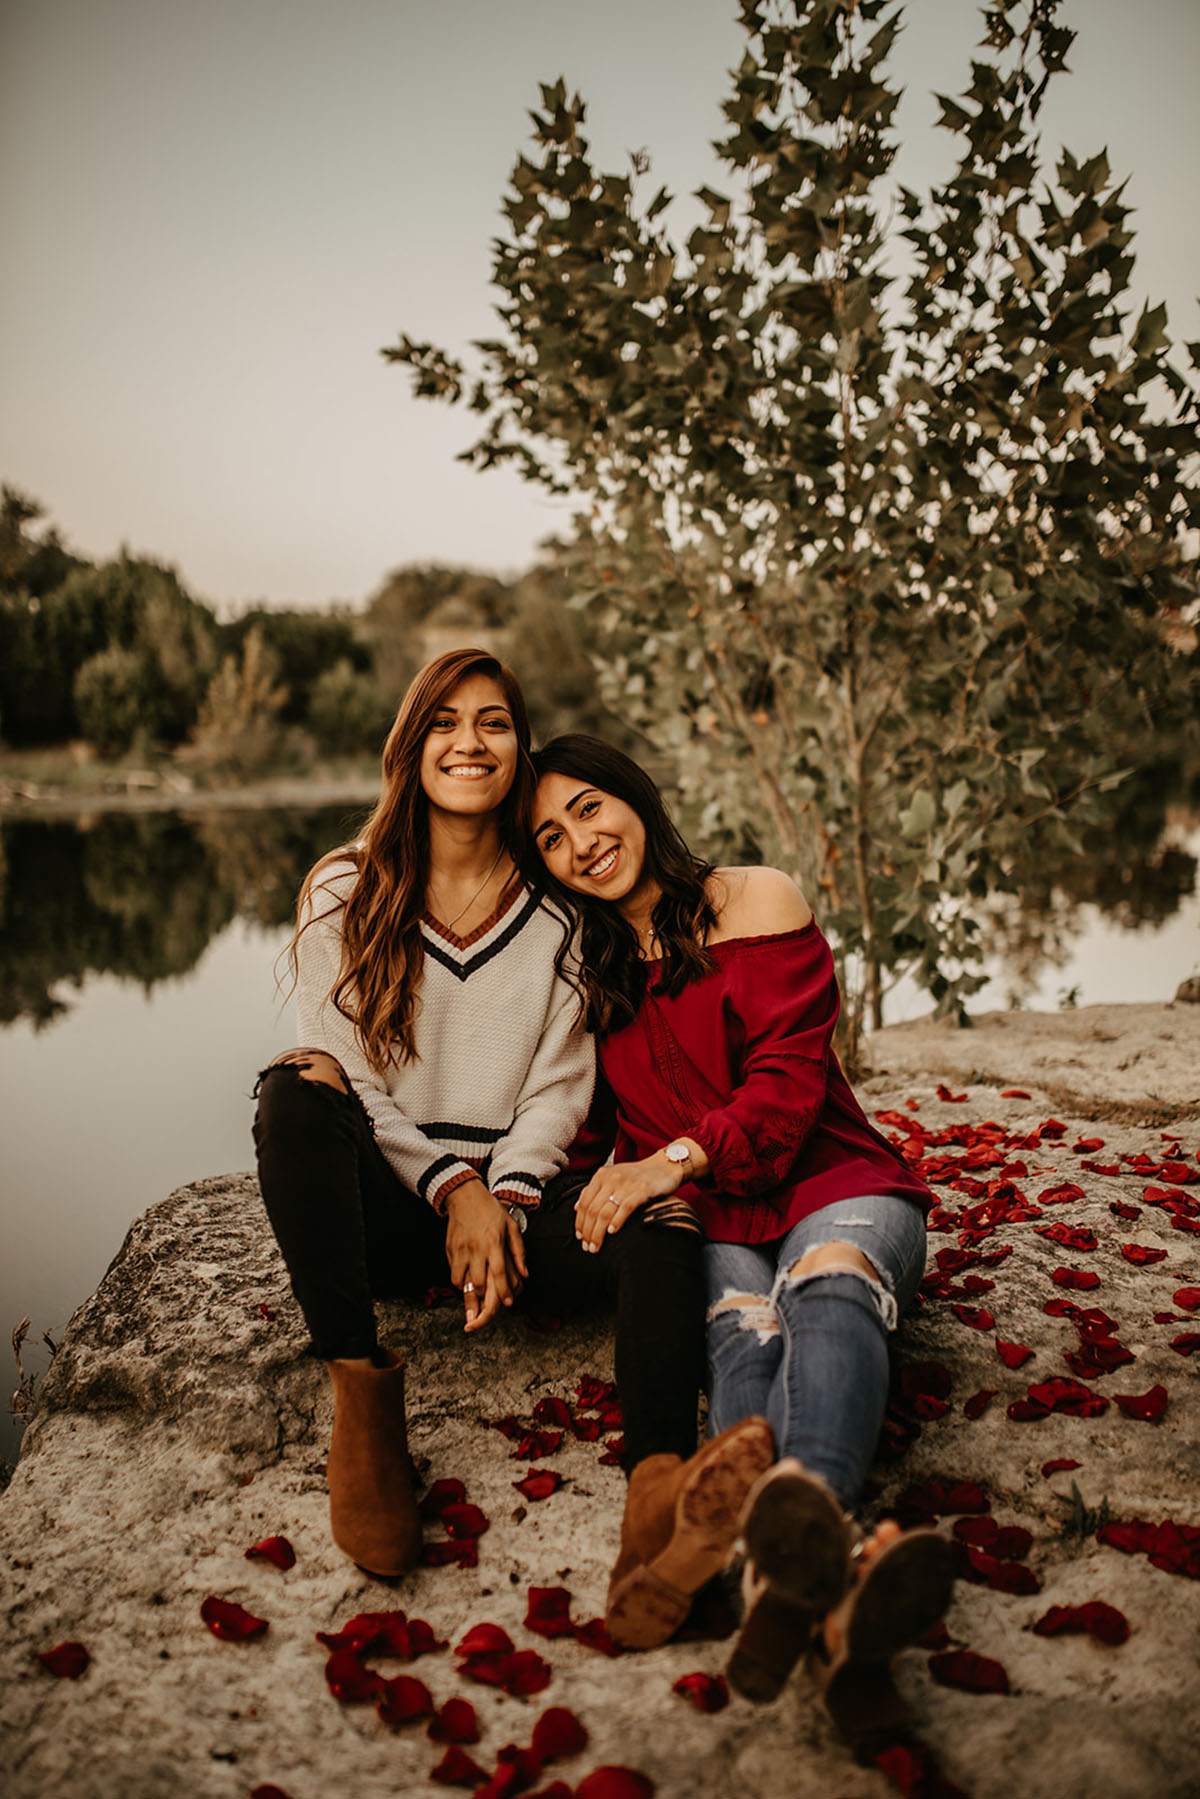 Fall photos turned surprise proposal in San Antonio, Texas moody romantic two brides rose petals outdoors water lake